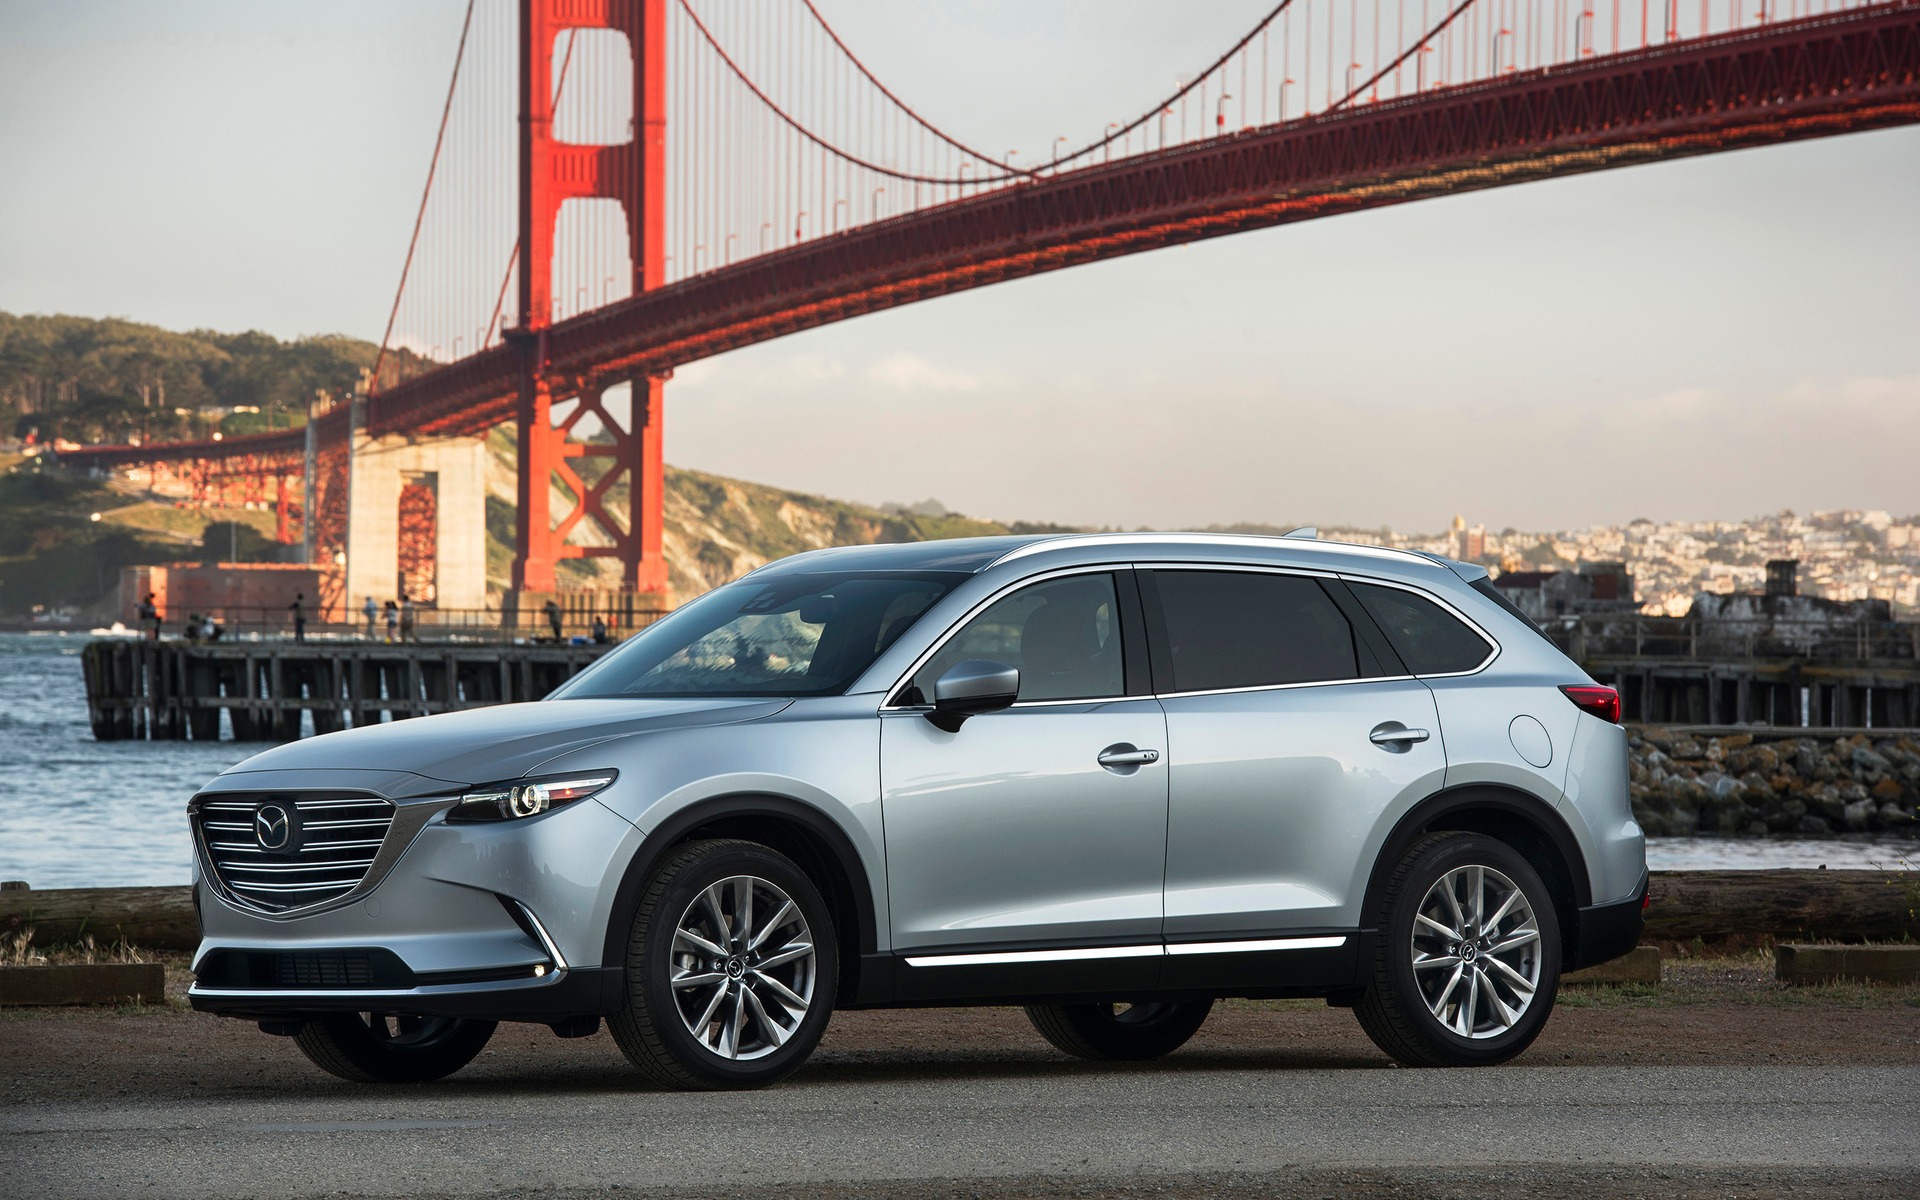 <p>Mazda CX-9, Best Large Utility Vehicle in Canada for 2018.</p>